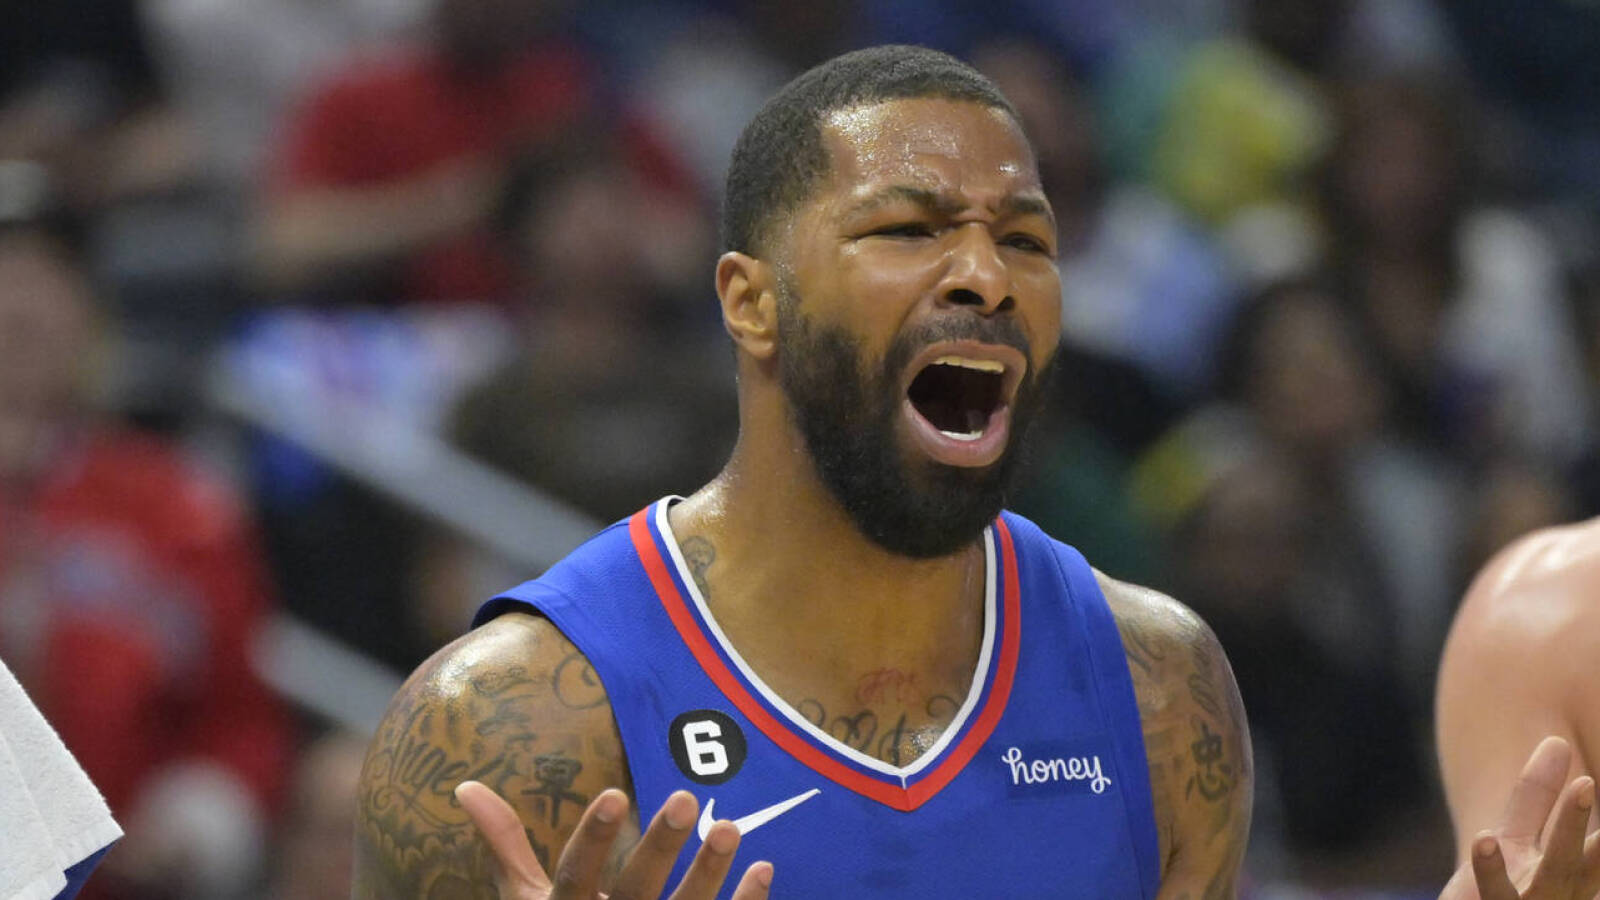 Report: Clippers primed to trade player unhappy with role